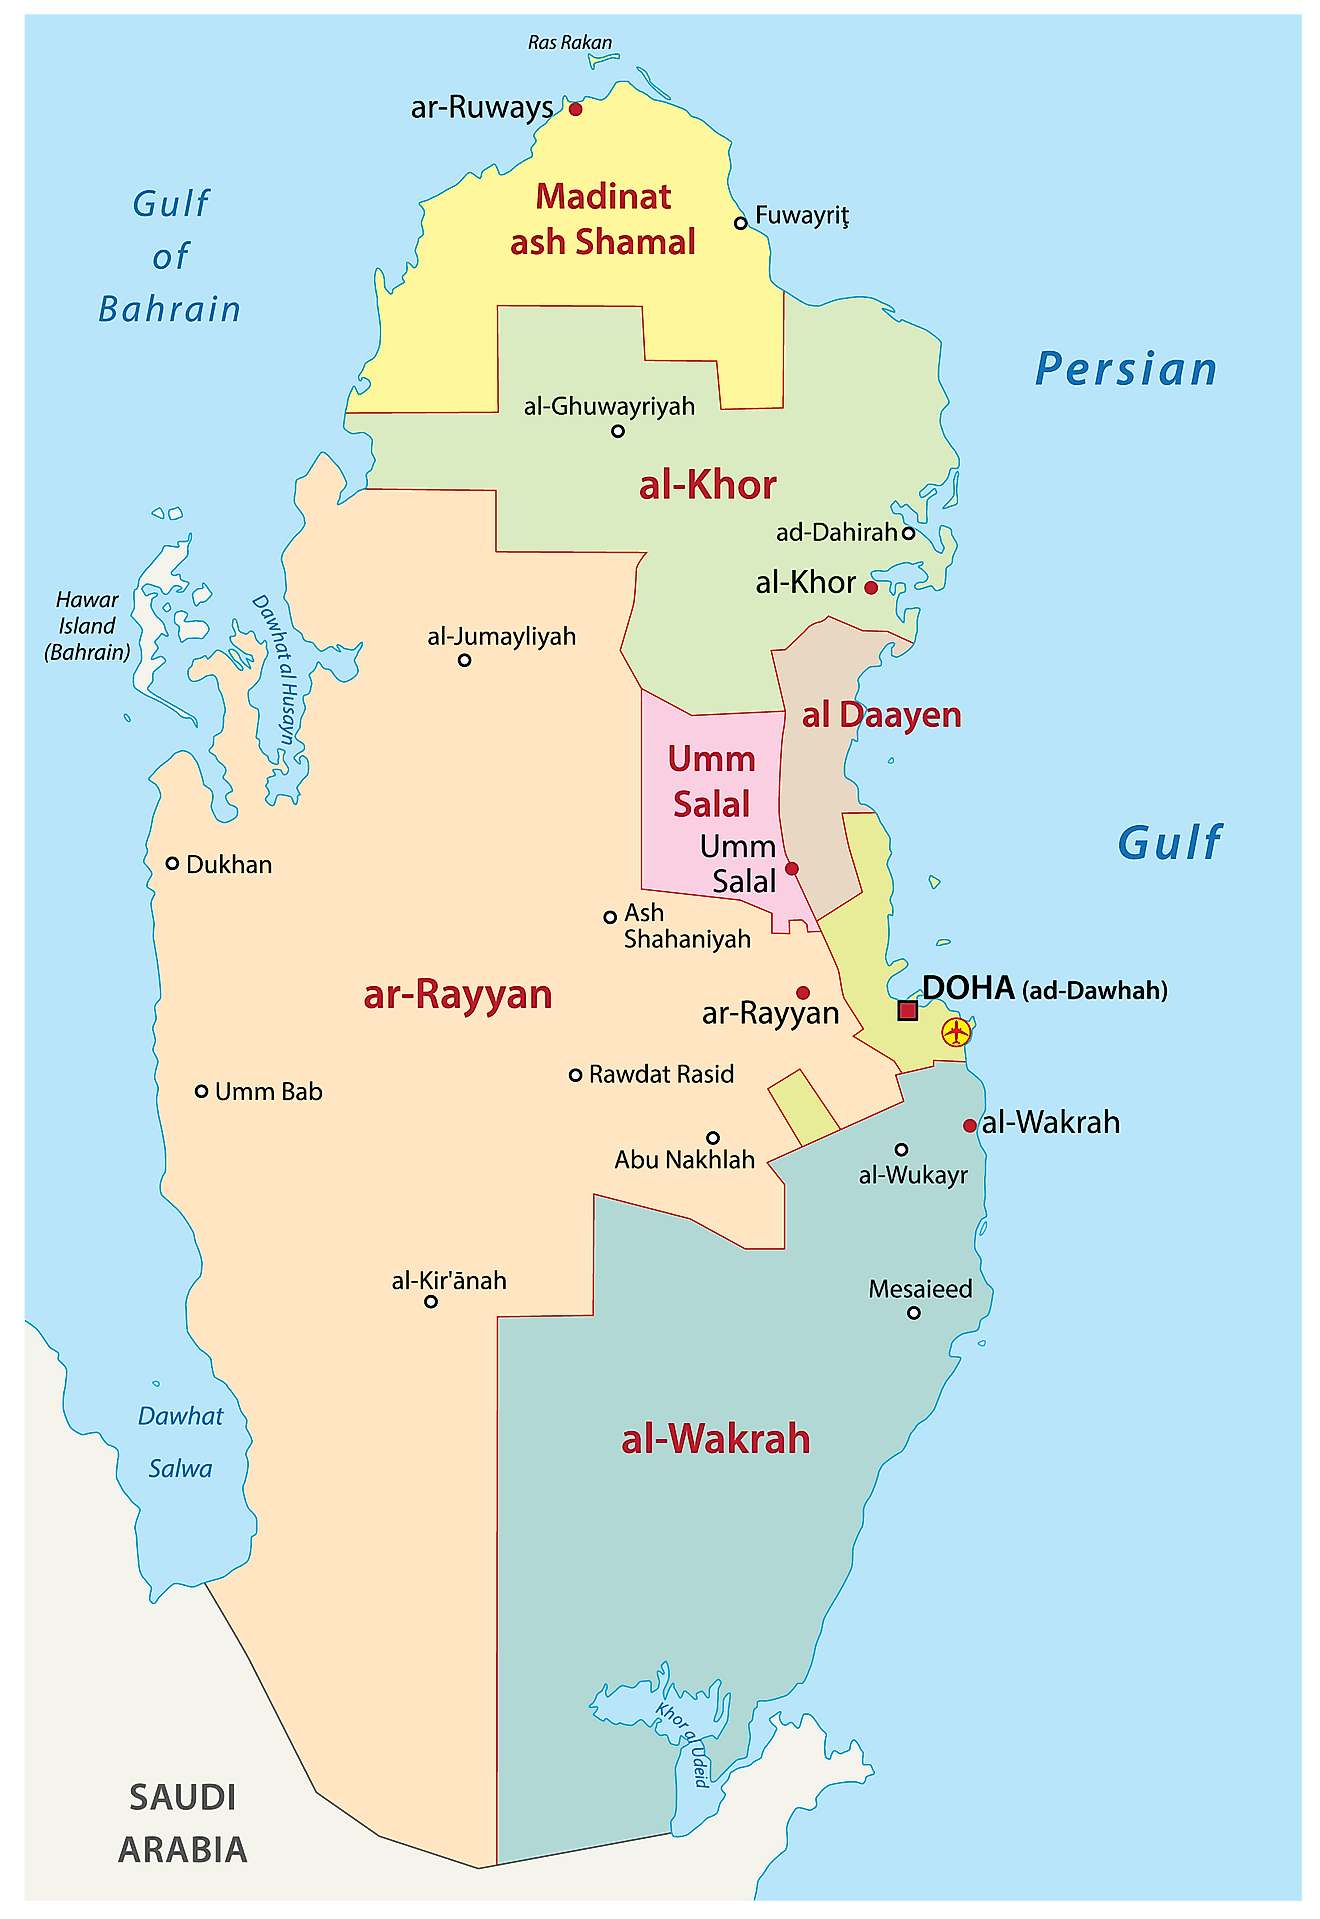 Political Map of Qatar showing the 8 municipalities, their capitals, and the national capital of Doha.